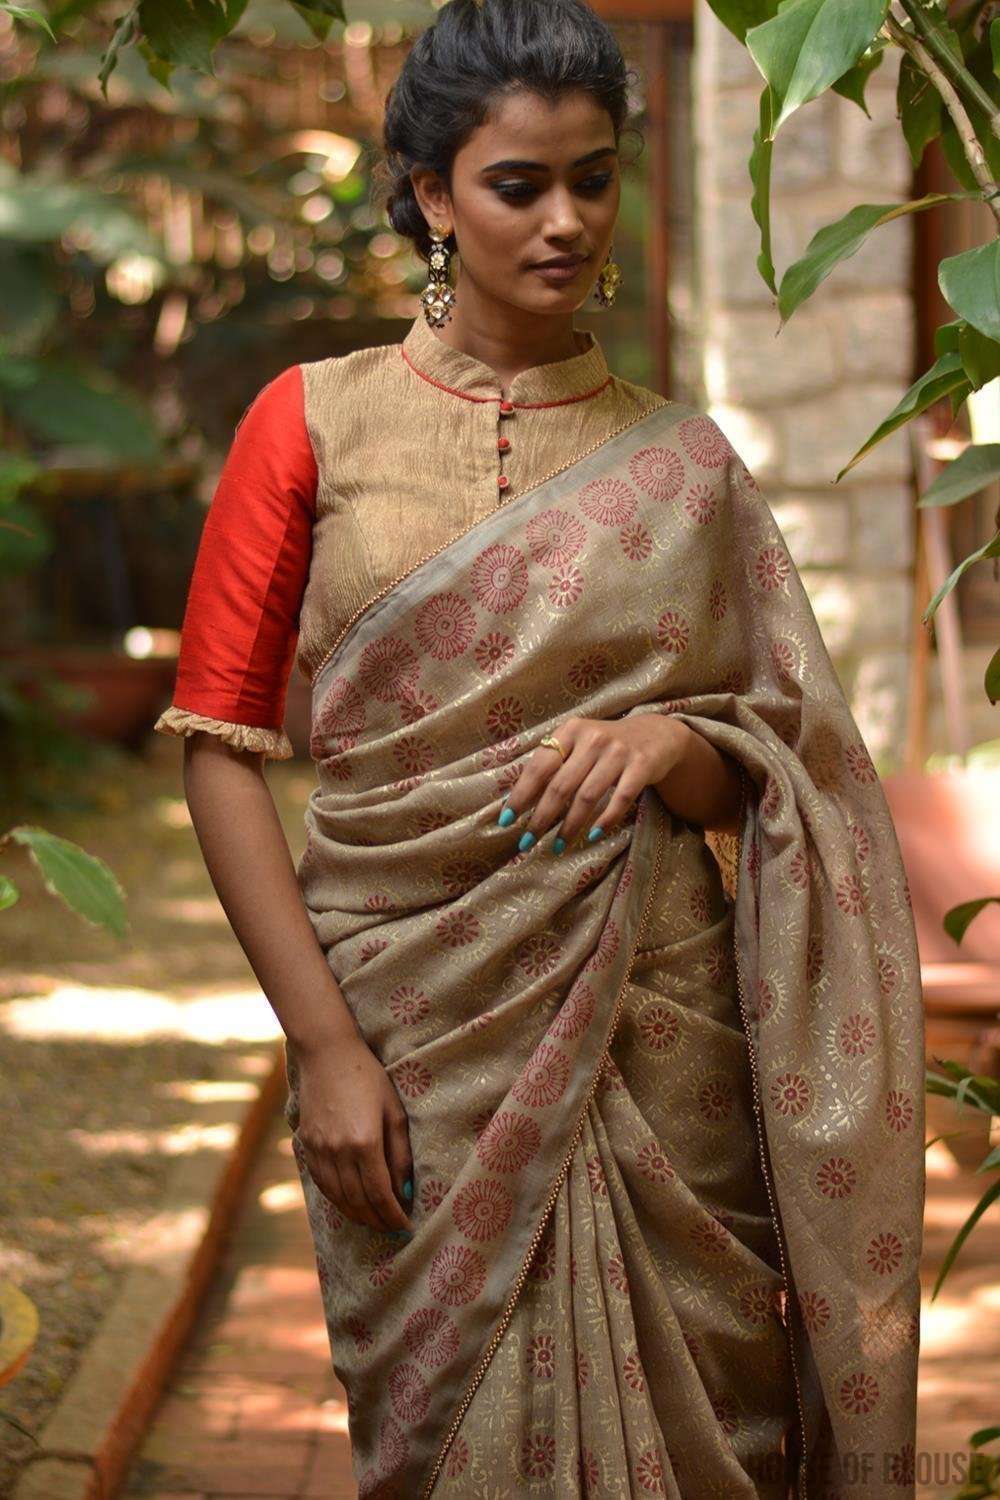 Beige soft linen saree with maroon and gold block print, tissue edging and gold bead edging - House of Blouse